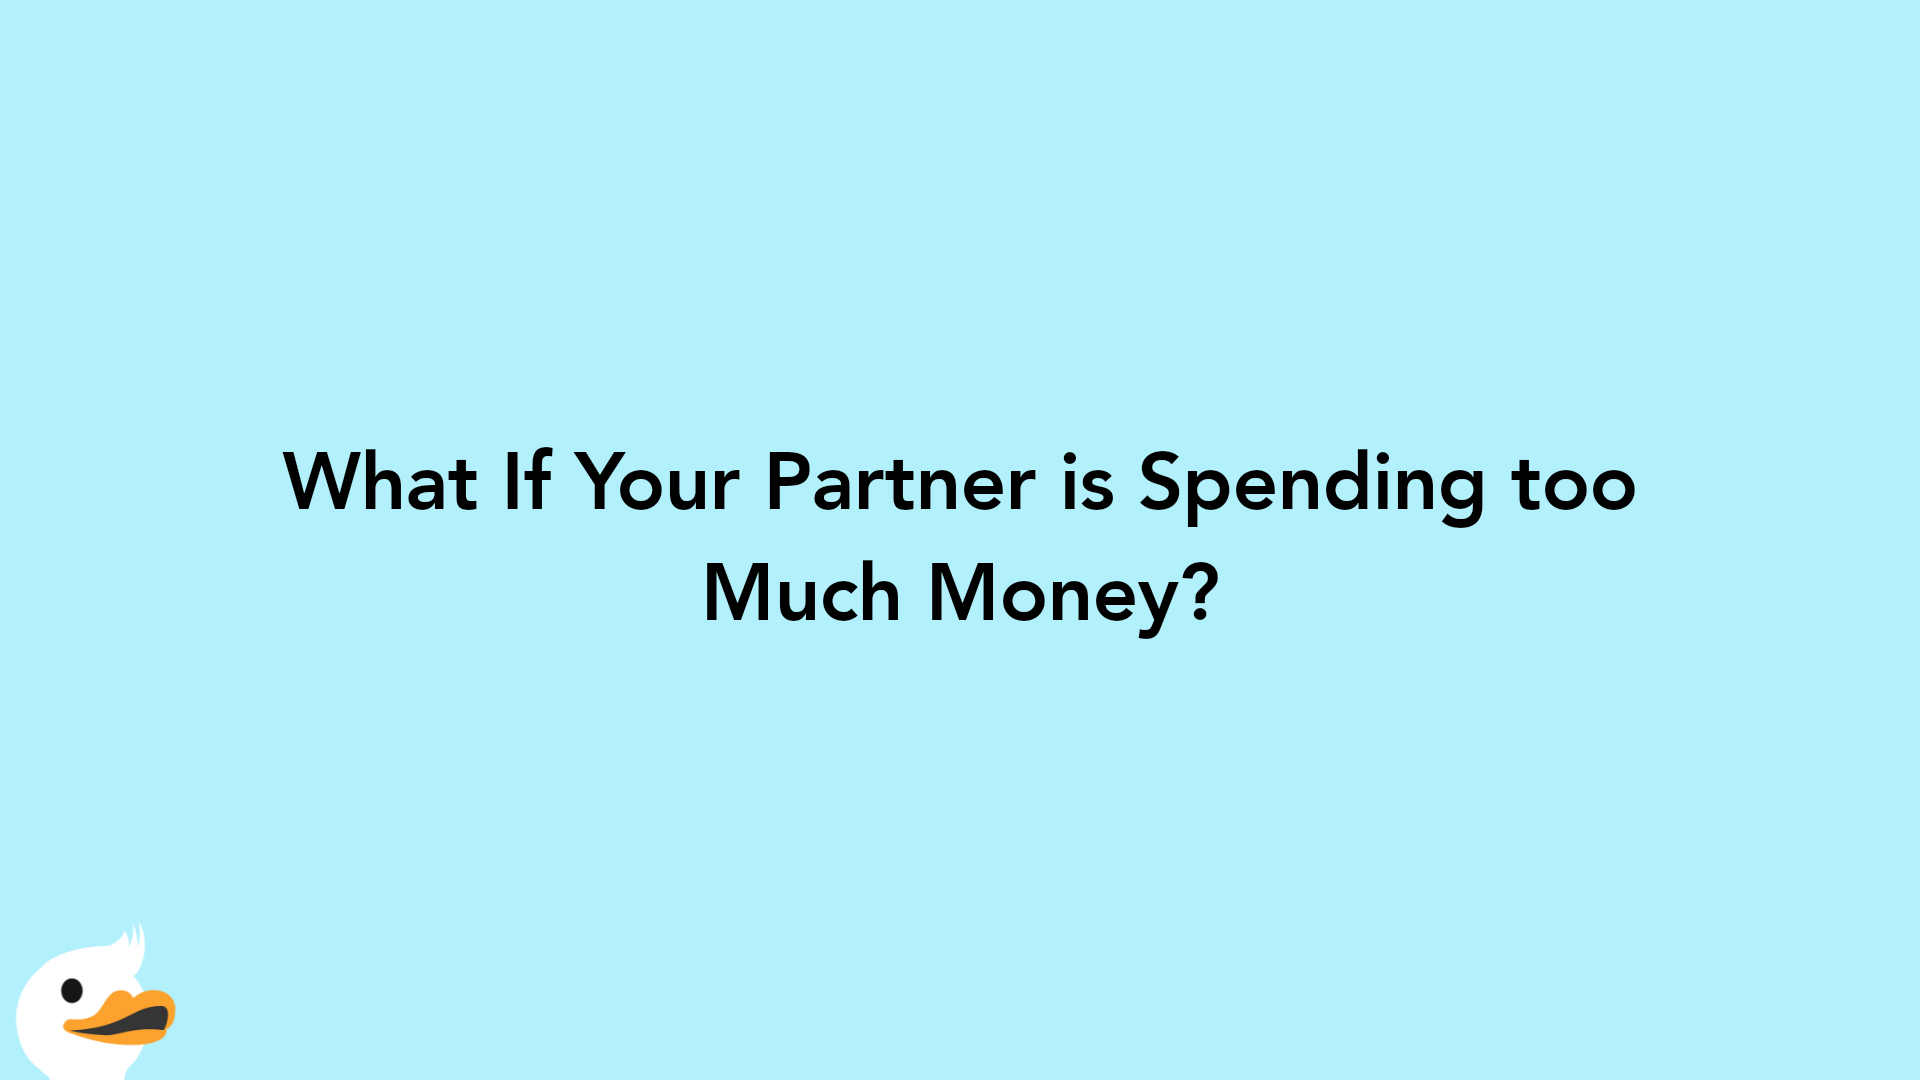 What If Your Partner is Spending too Much Money?